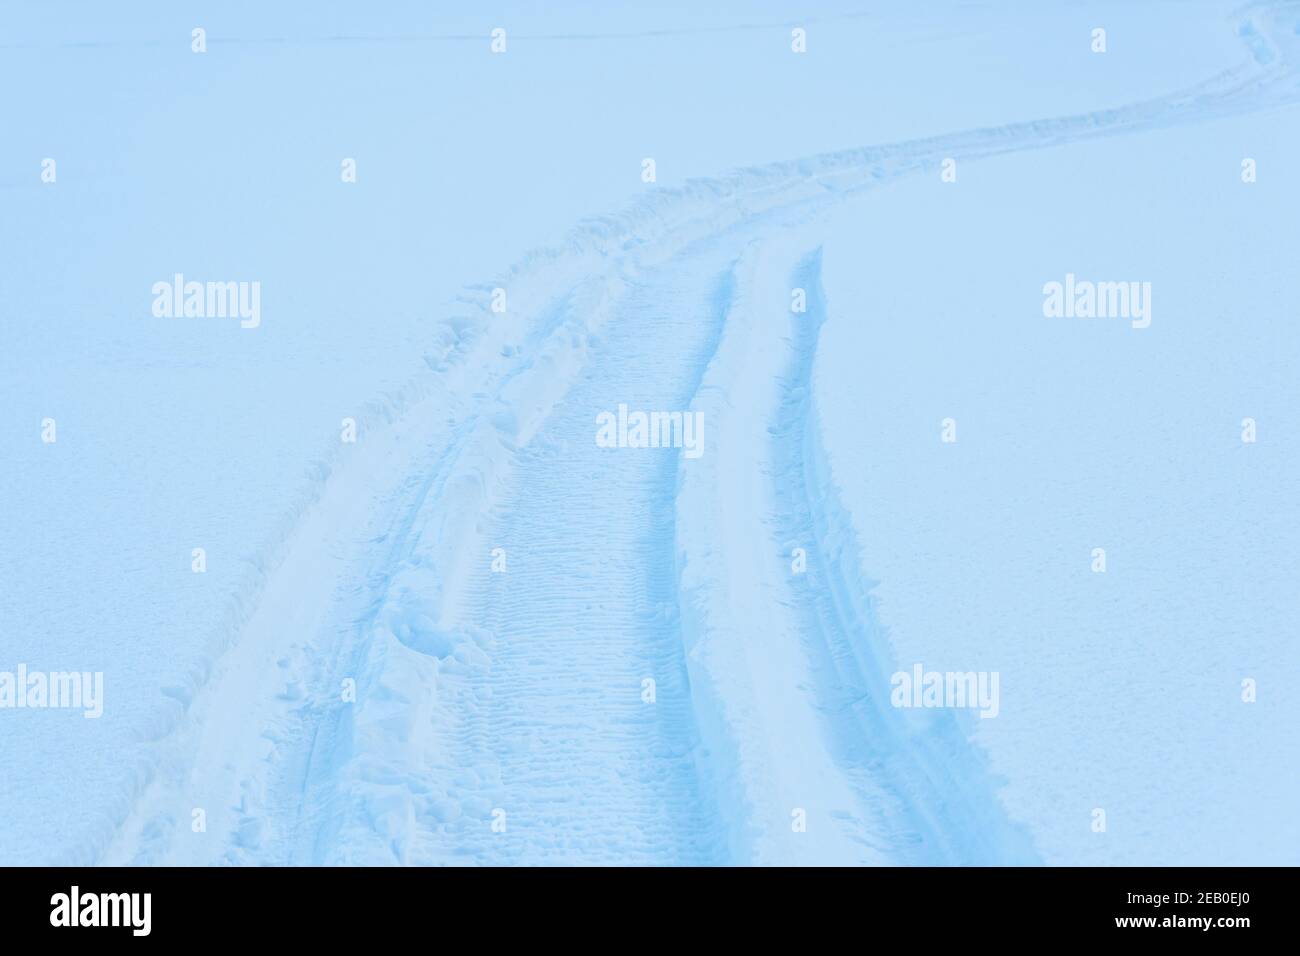 Snowmobile tracks in deep snow. Twisting traces of a snowmobile crossing snow covered field Stock Photo